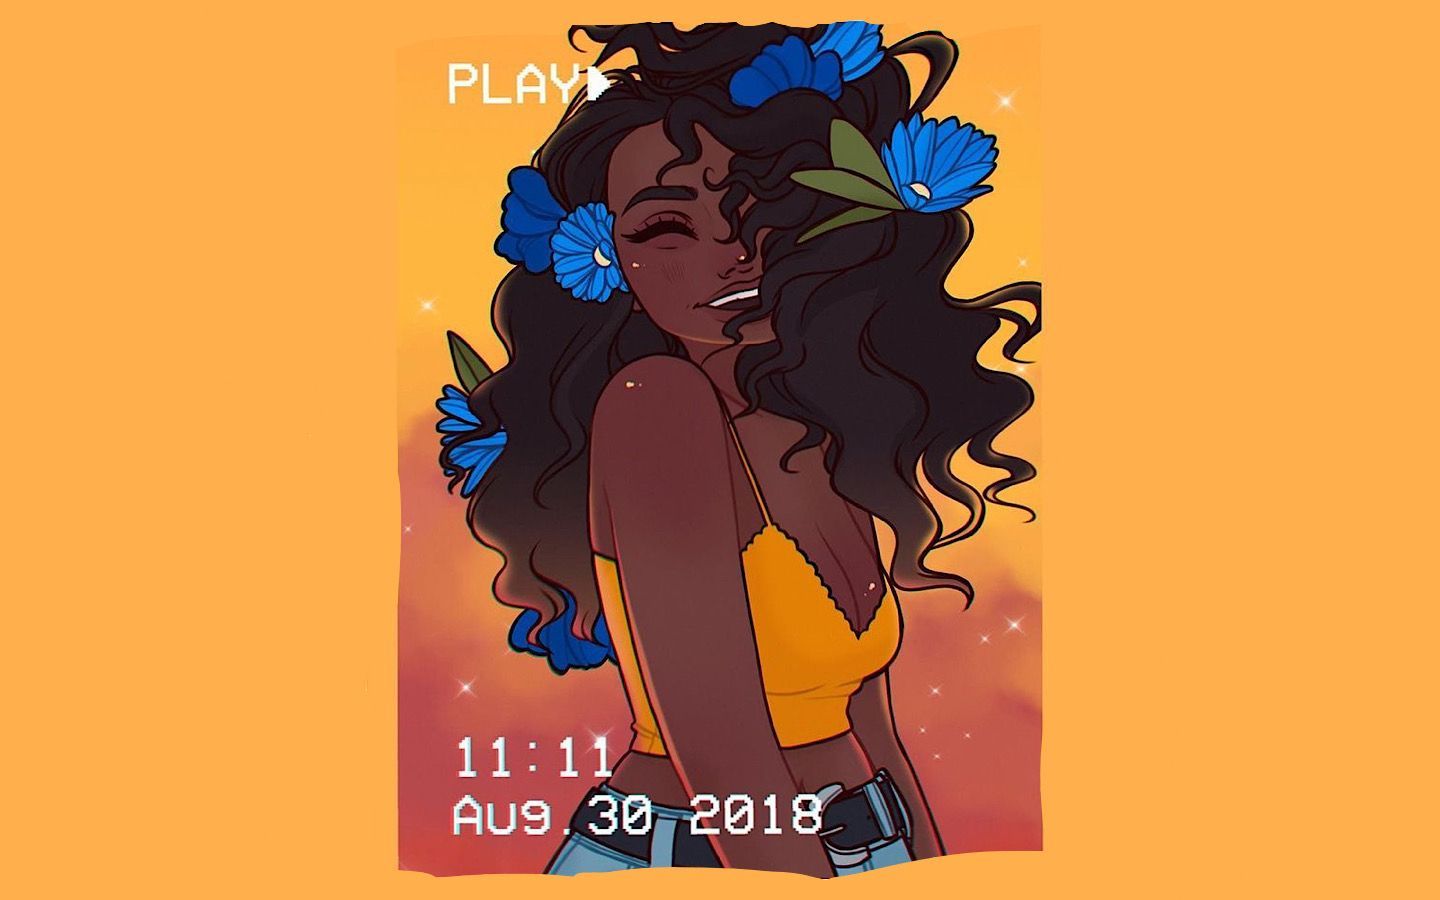 A cartoon illustration of a black woman with flowers in her hair and a date of Aug 30, 2018 - Computer, magic, dark orange